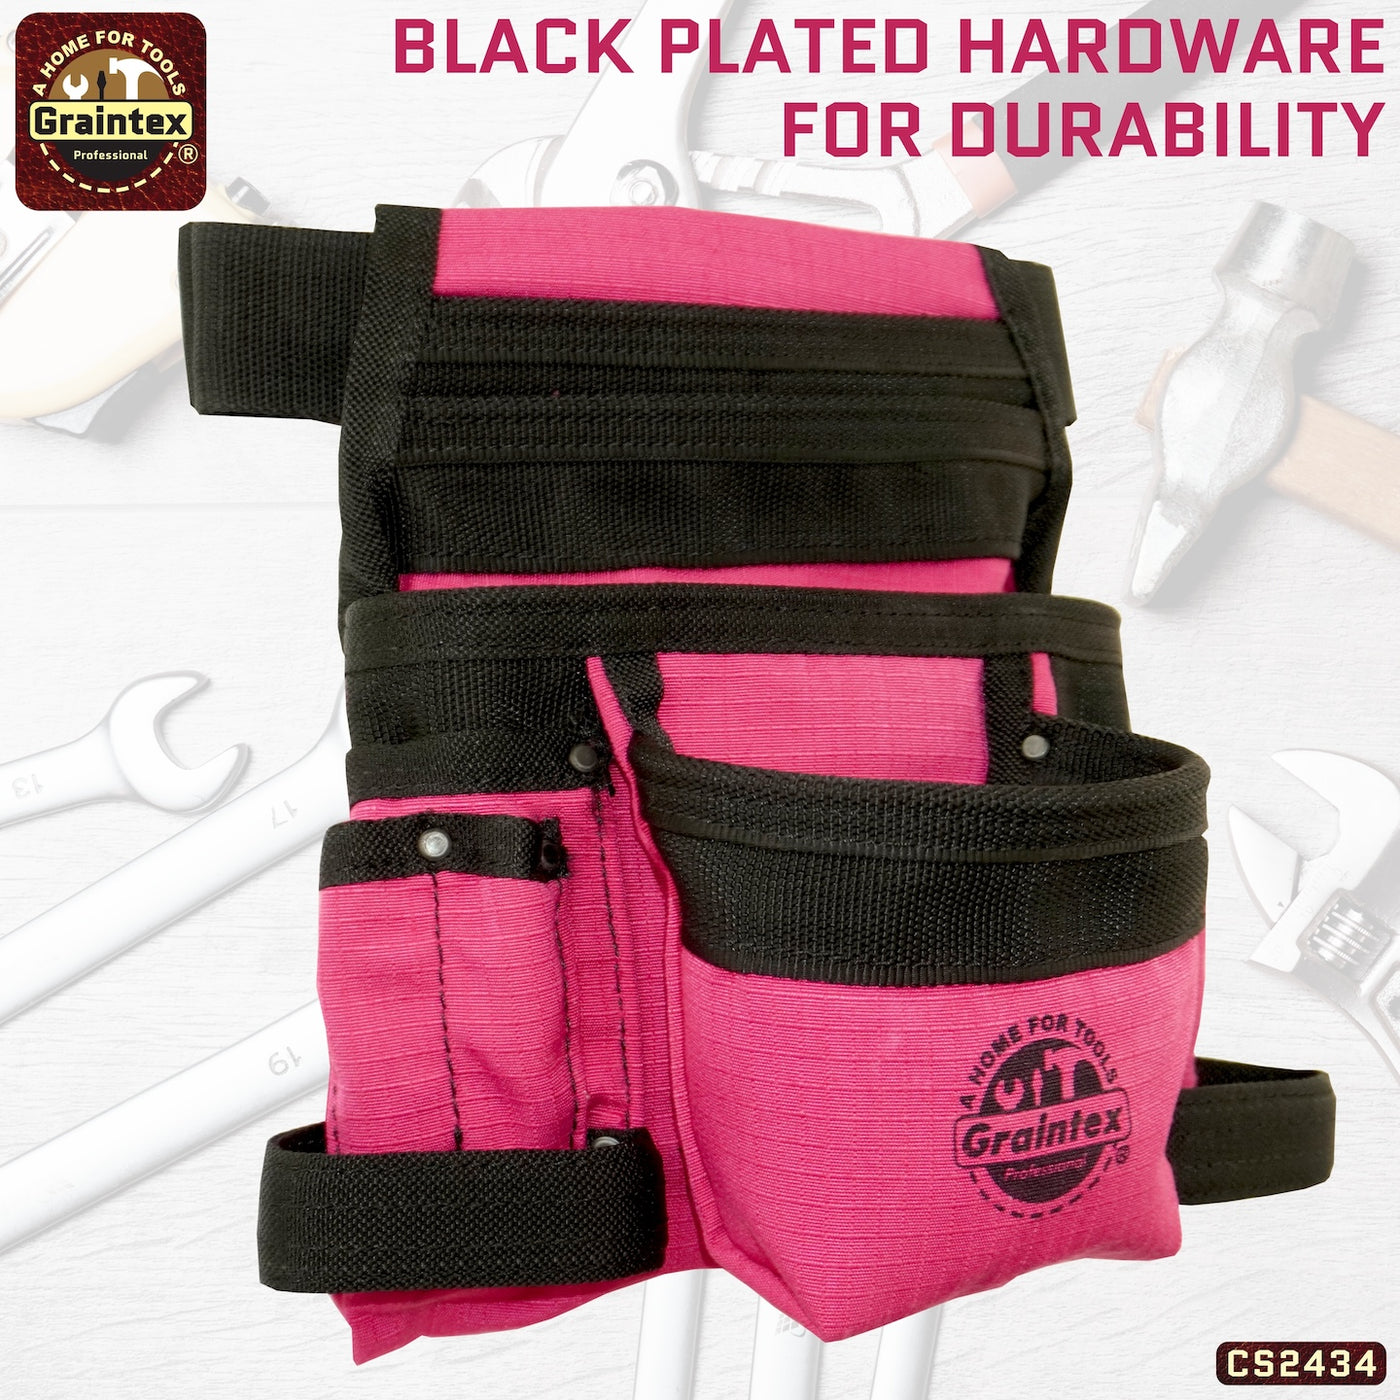 CS2434 :: 10 Pocket Finisher Nail & Tool Pouch Pink Color Ripstop Canvas with 2” Webbing Belt